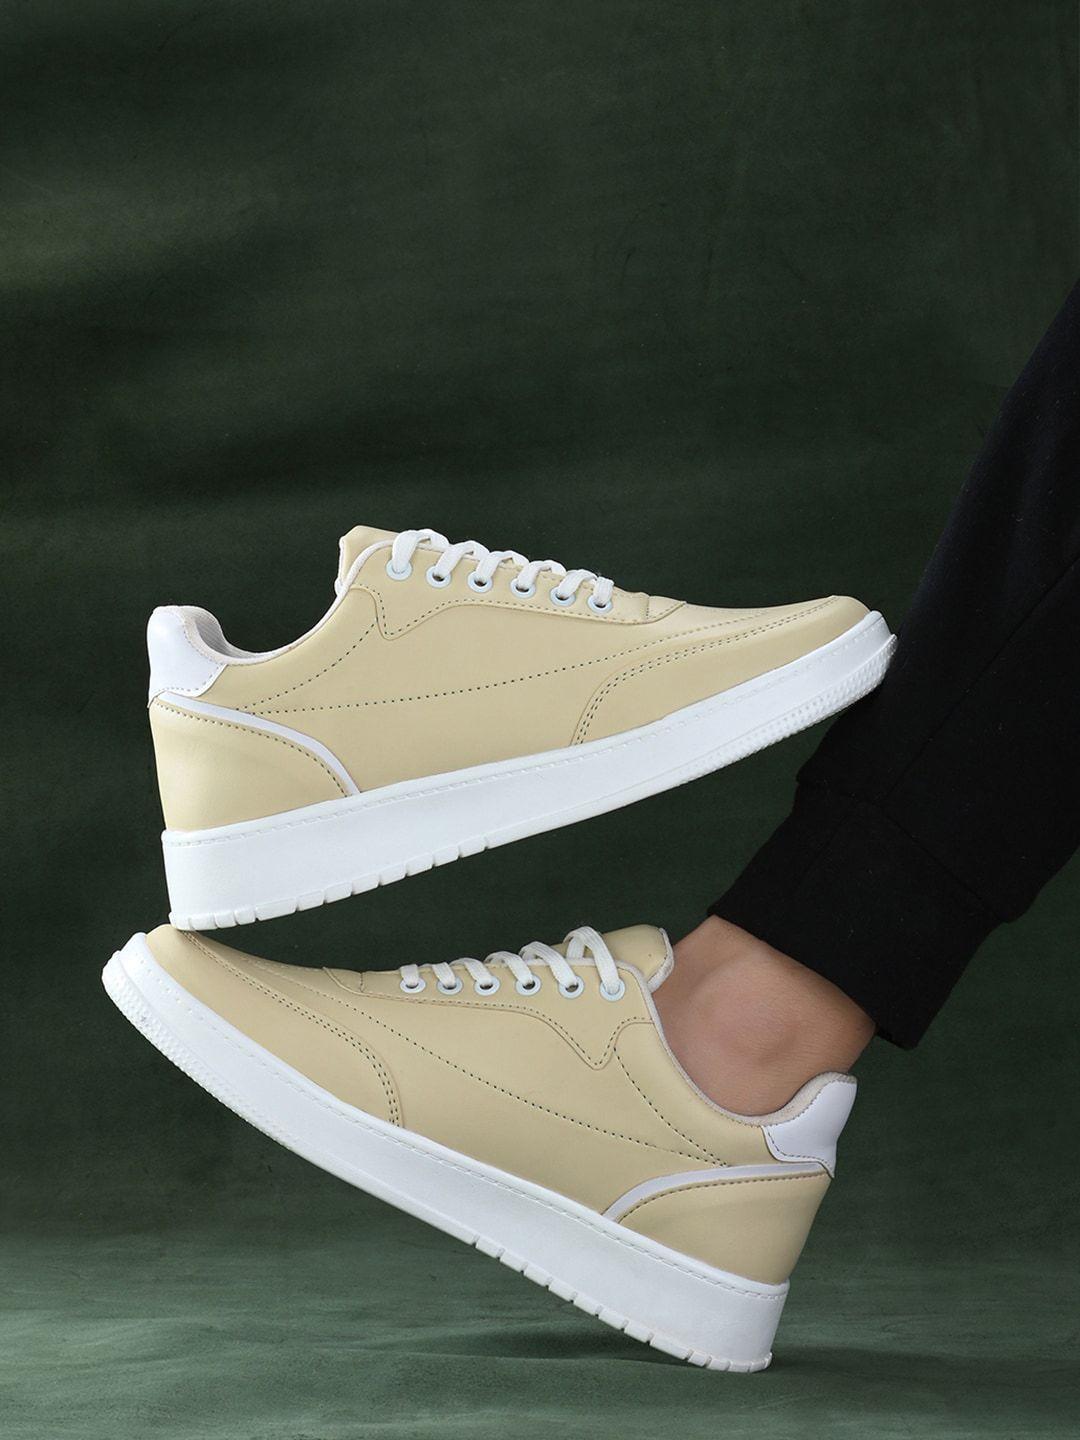 the-roadster-lifestyle-co.-men-cream-coloured-&-white-comfort-insole-lightweight-sneakers